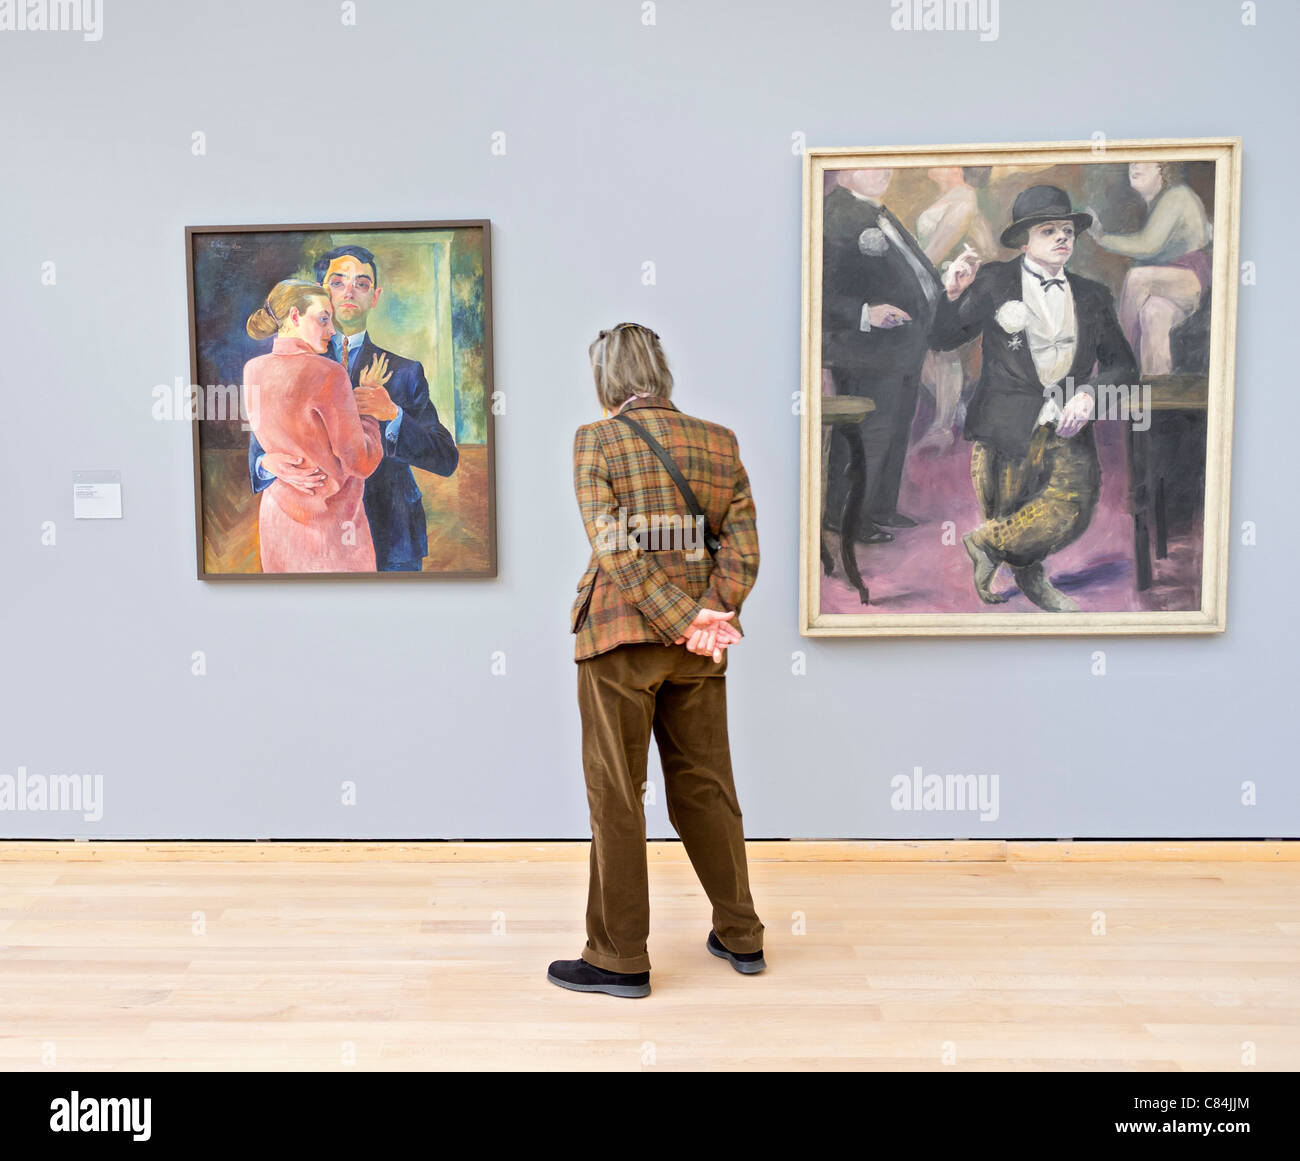 Woman looking at paintings at at the Museum Kunst Palast or Art Palace Museum in Dusseldorf in Germany Stock Photo